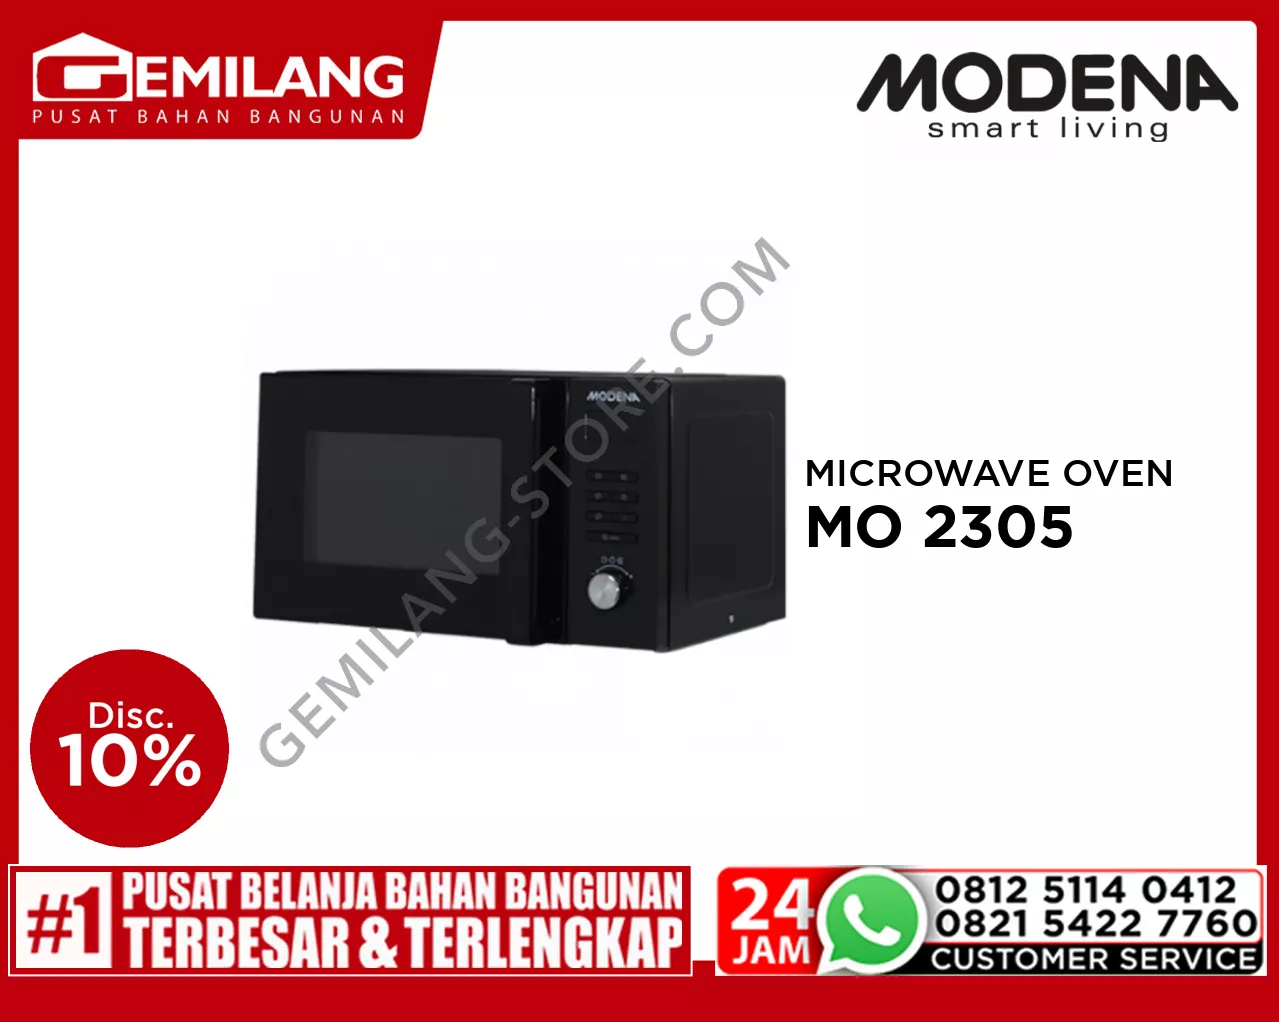 MODENA MICROWAVE OVEN MO 2305